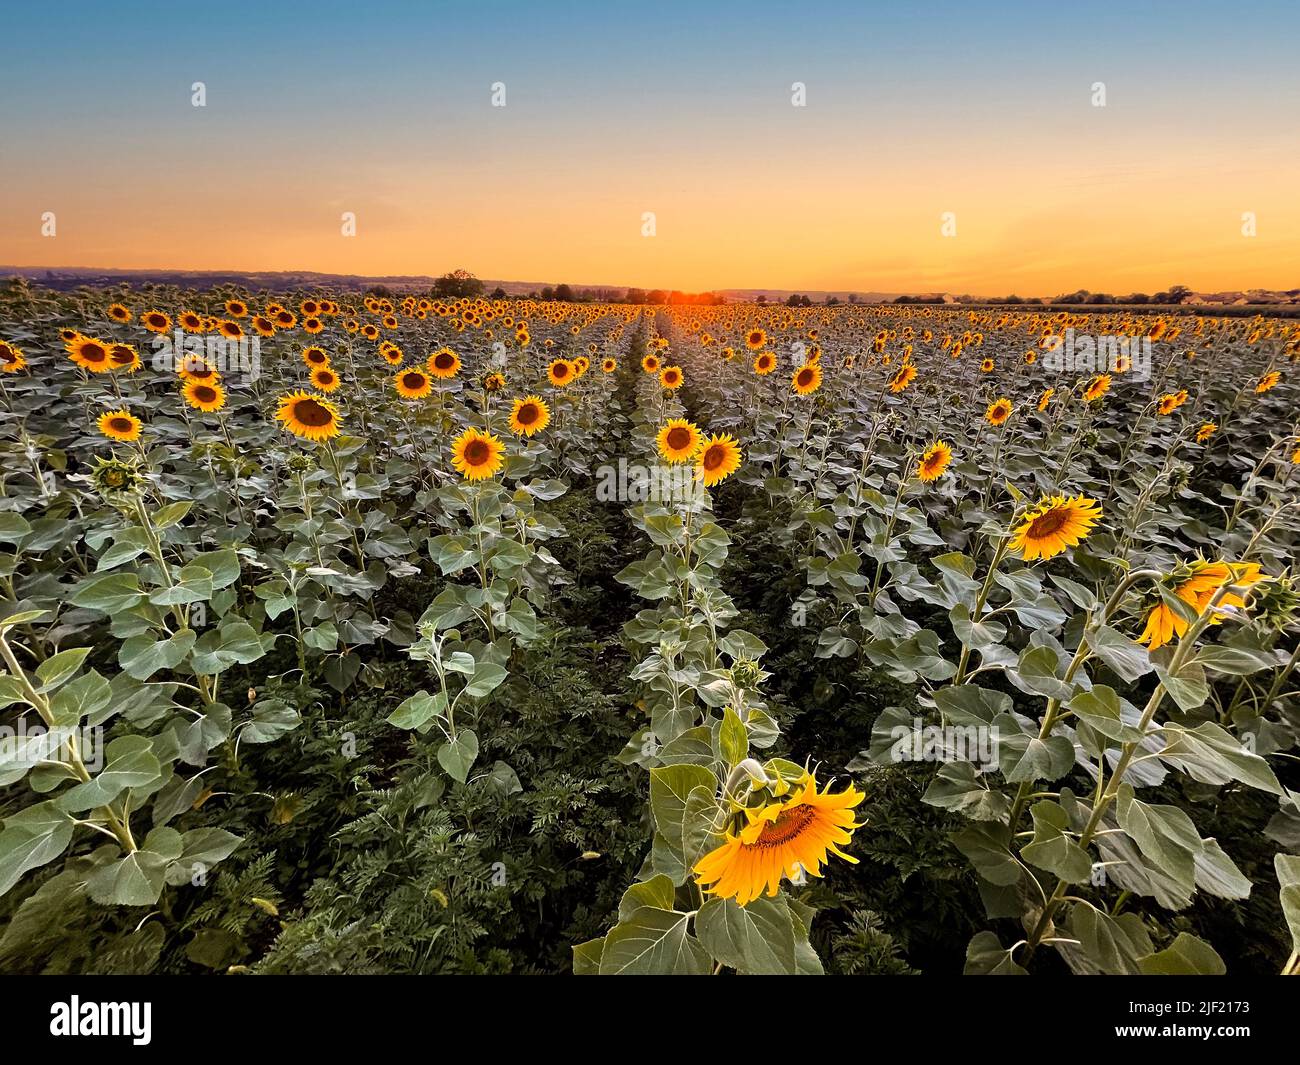 Sunflower field rows in summer at golden hour sunset Stock Photo